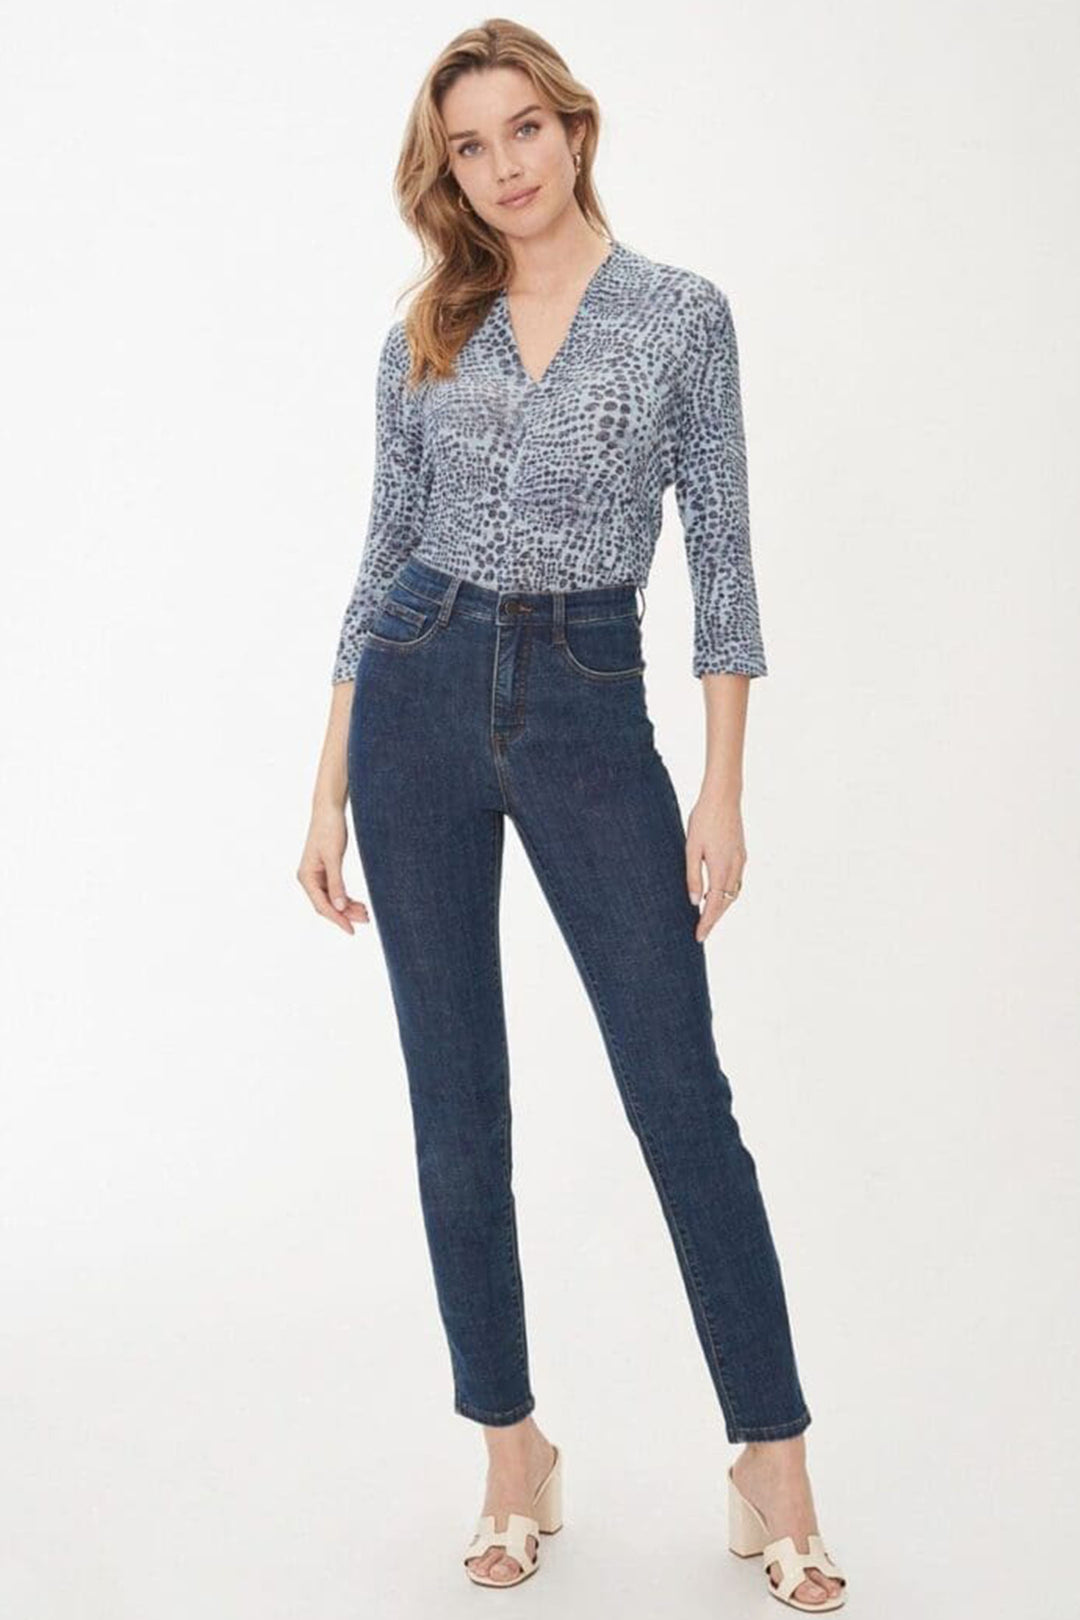 FDJ Spring 2024 Crafted with a high-rise fit and medium stretch, these jeans provide both comfort and style. The button and zip fly add a sophisticated touch while the classic five-pocket design offers practicality.